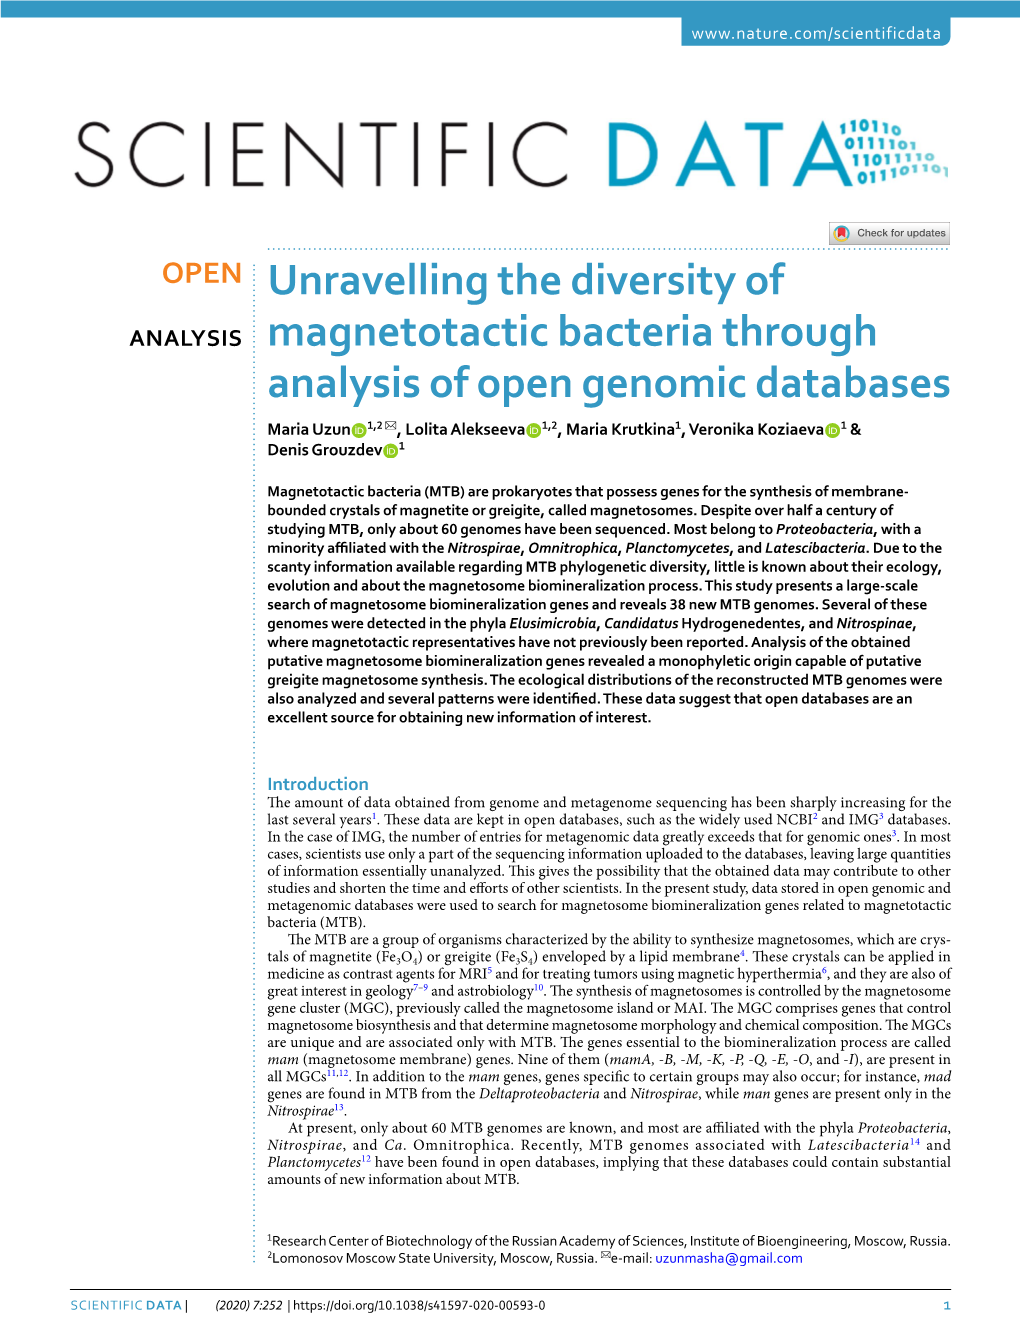 Unravelling the Diversity of Magnetotactic Bacteria Through Analysis of Open Genomic Databases